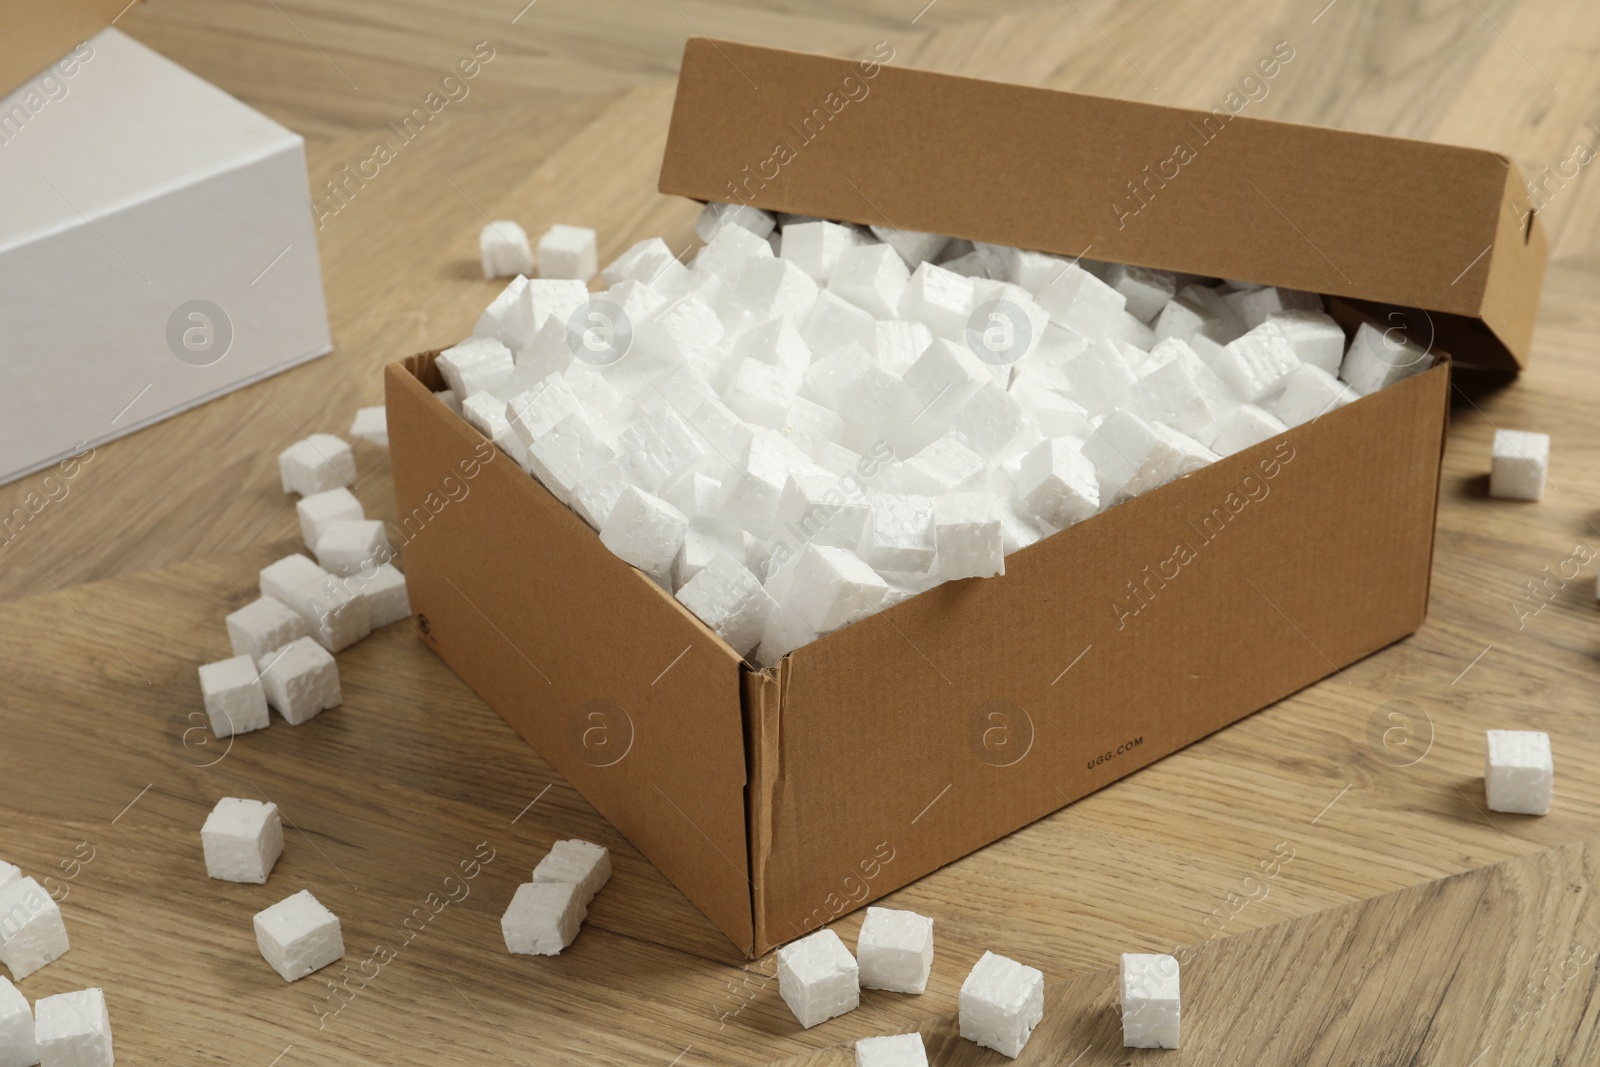 Photo of Cardboard box and styrofoam cubes on wooden floor